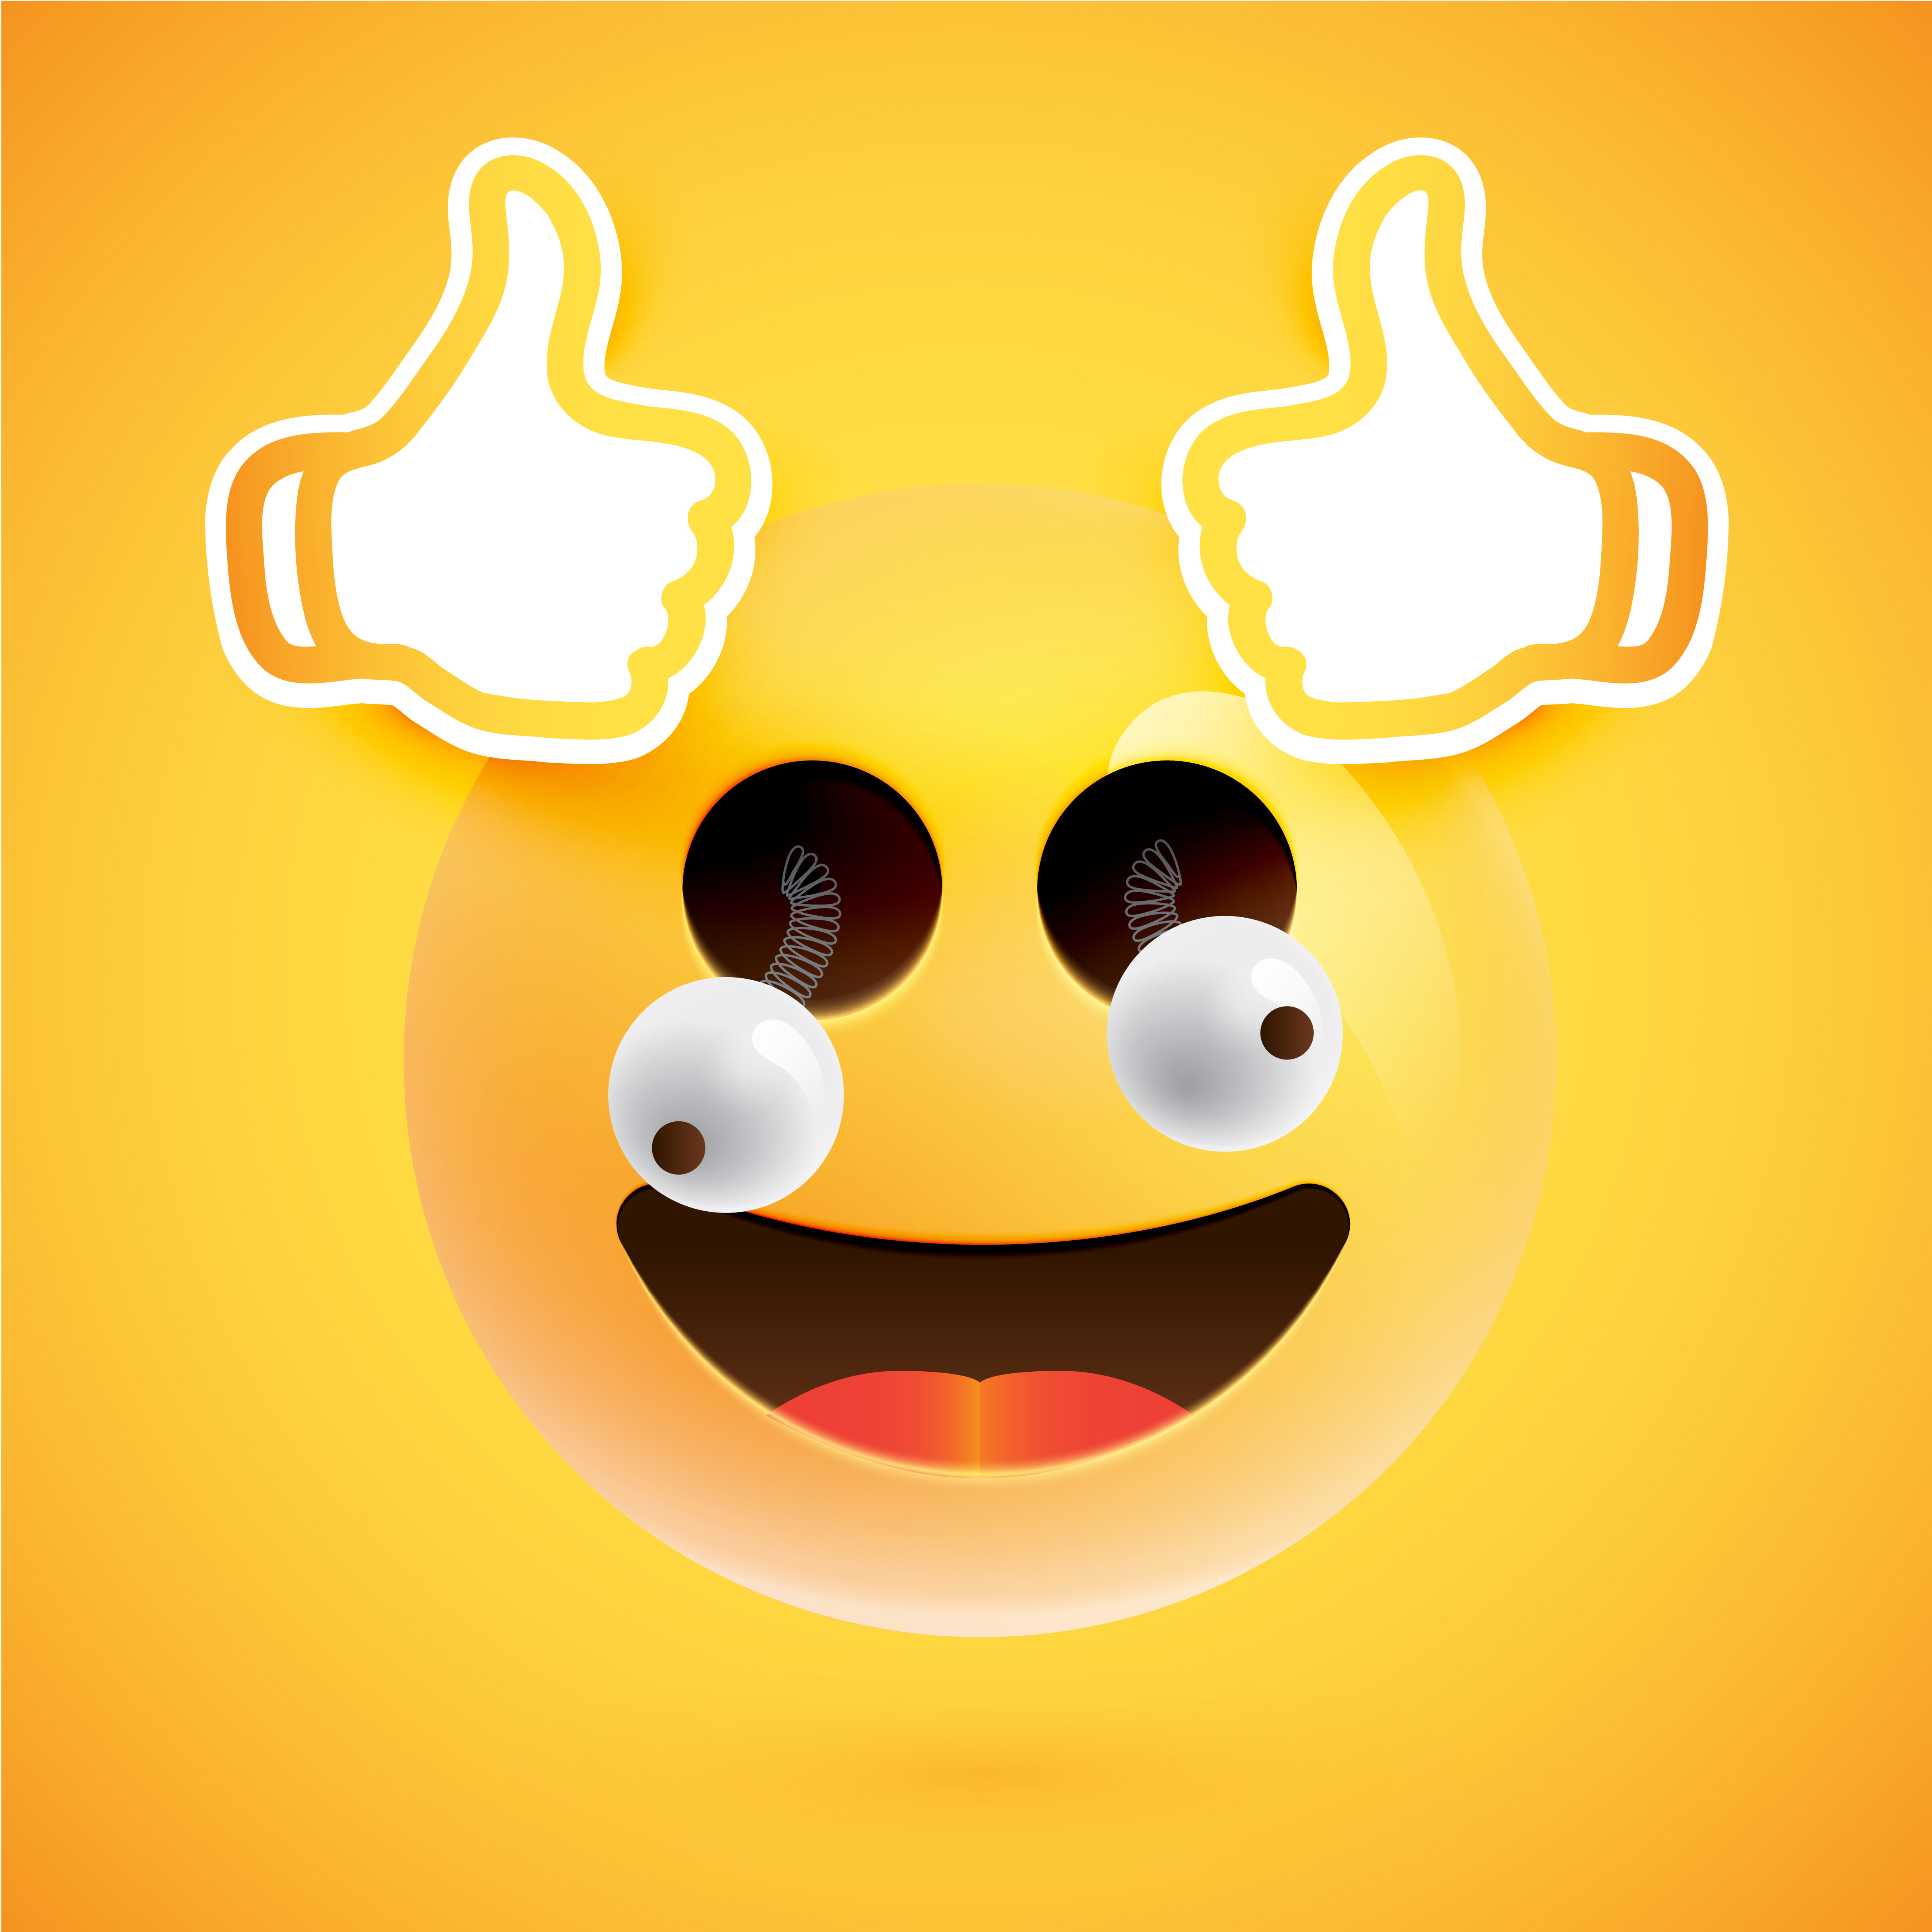 thumbs up emoticon